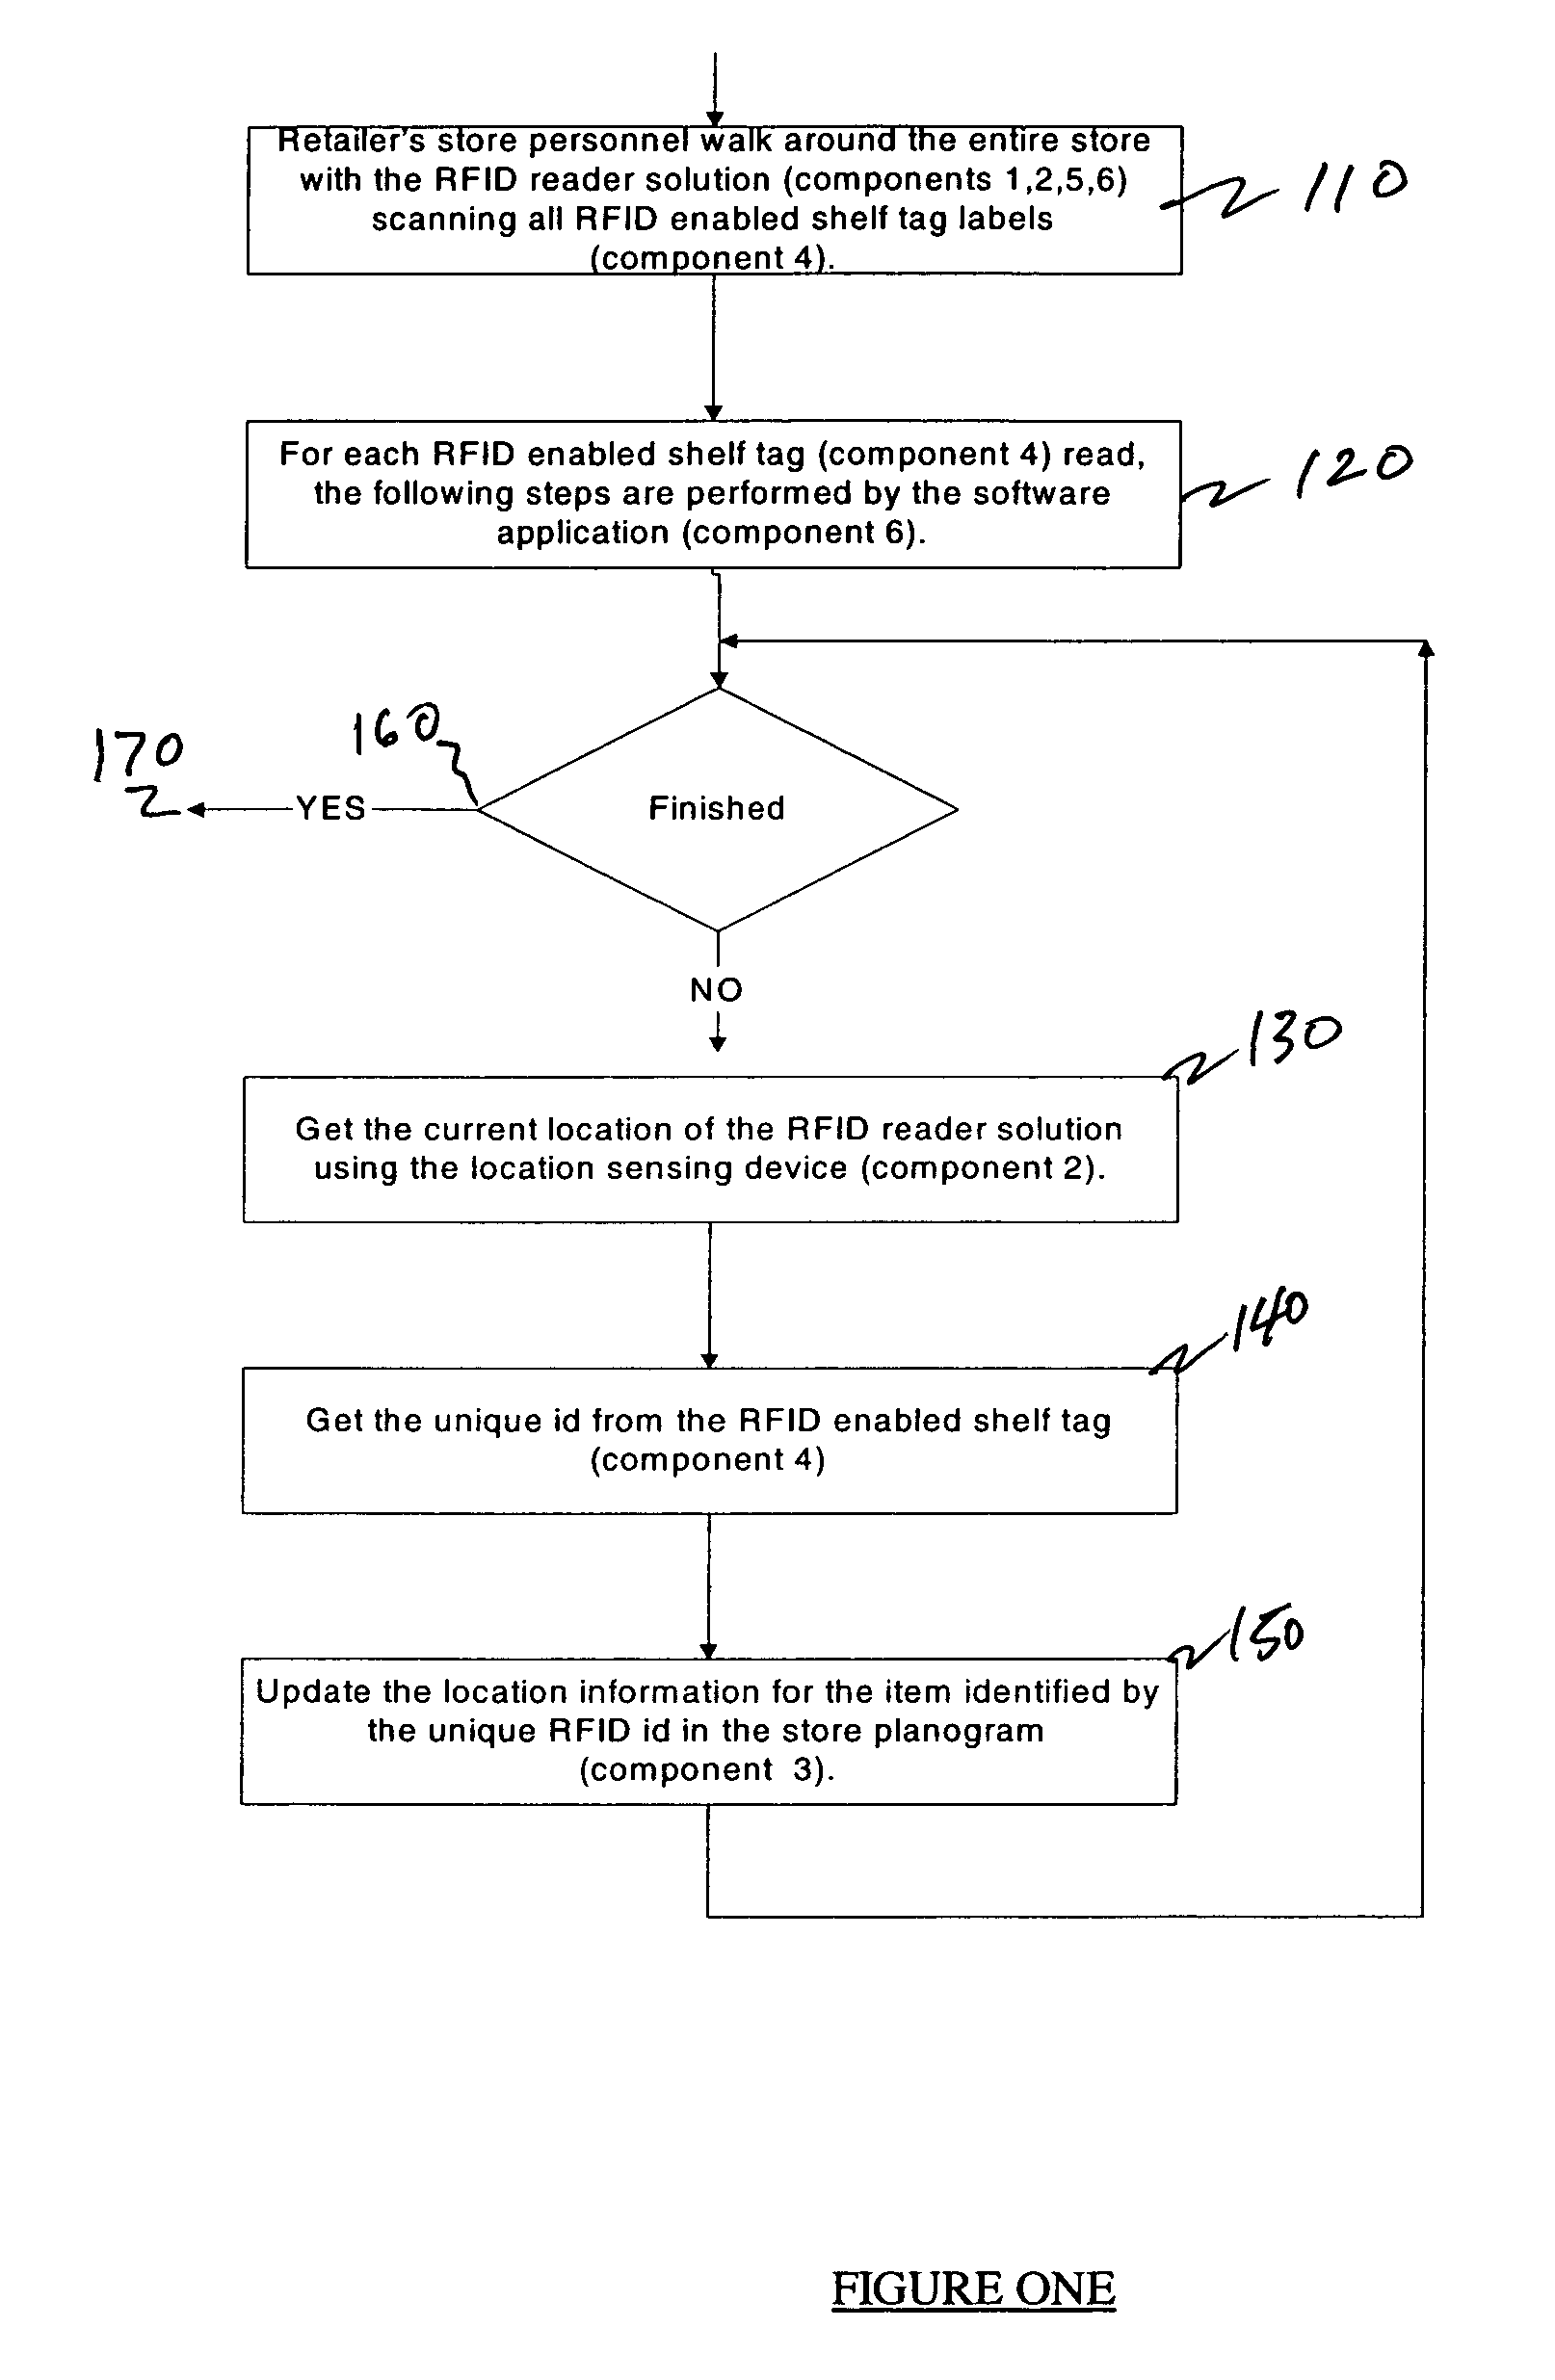 System and method of updating planogram information using RFID tags and personal shopping device